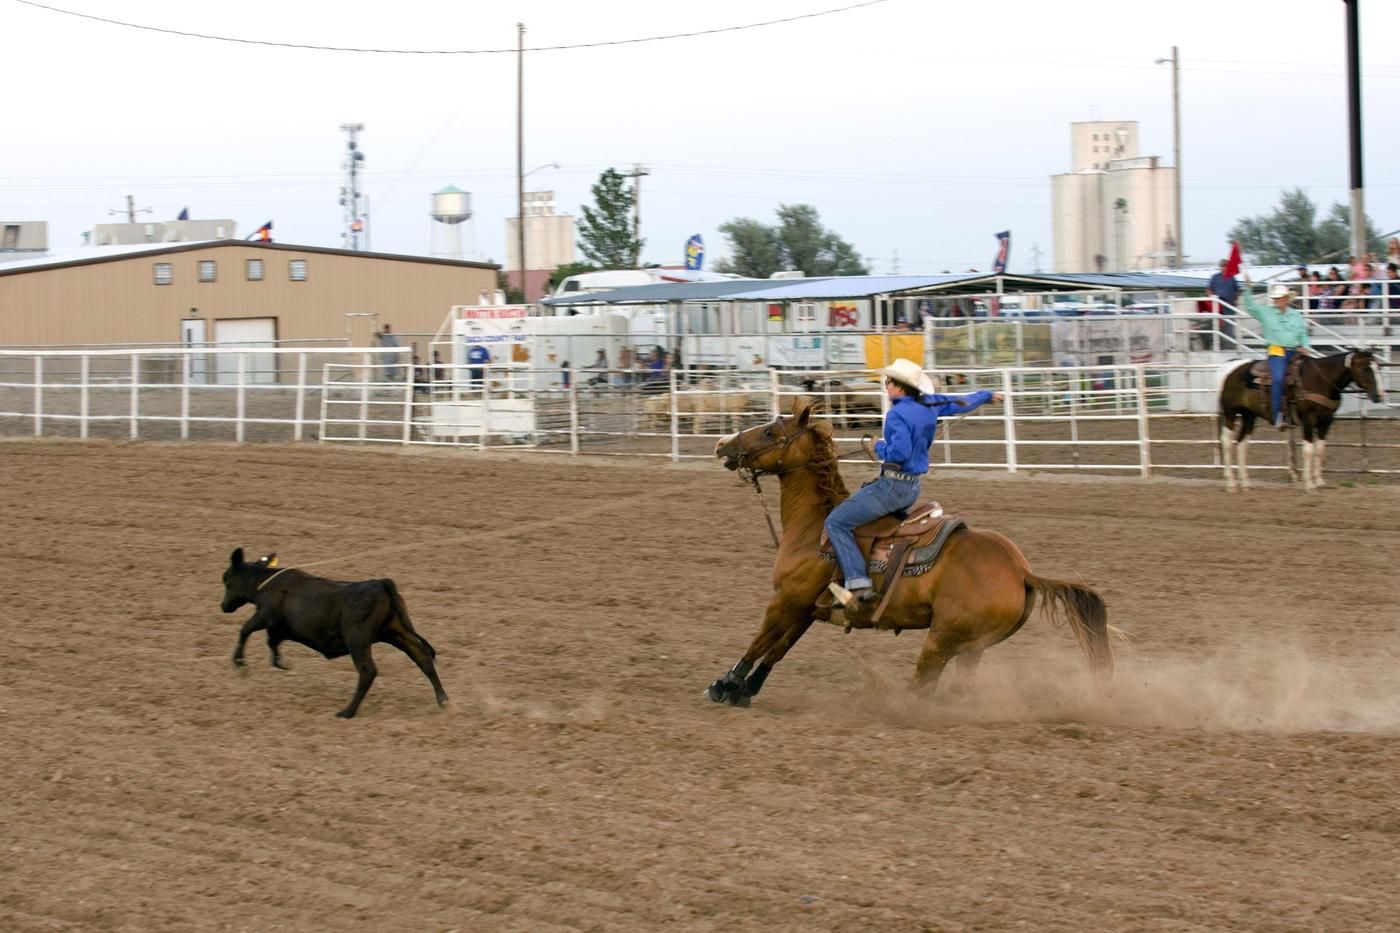 ranch rodeo cowboy on horse catching cows